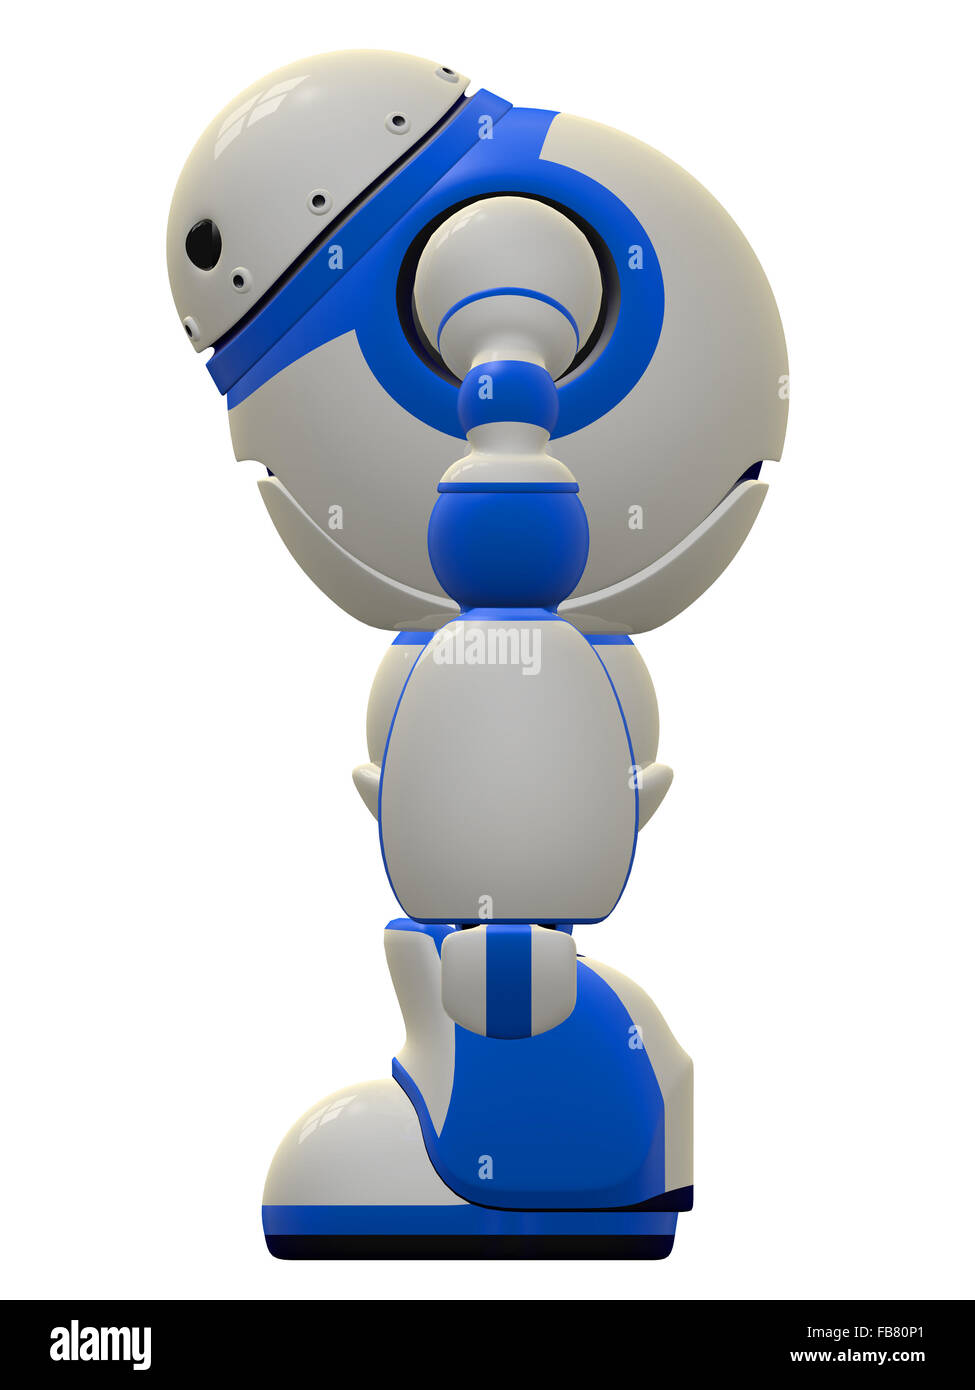 Side view of the software security robot concept. Stock Photo